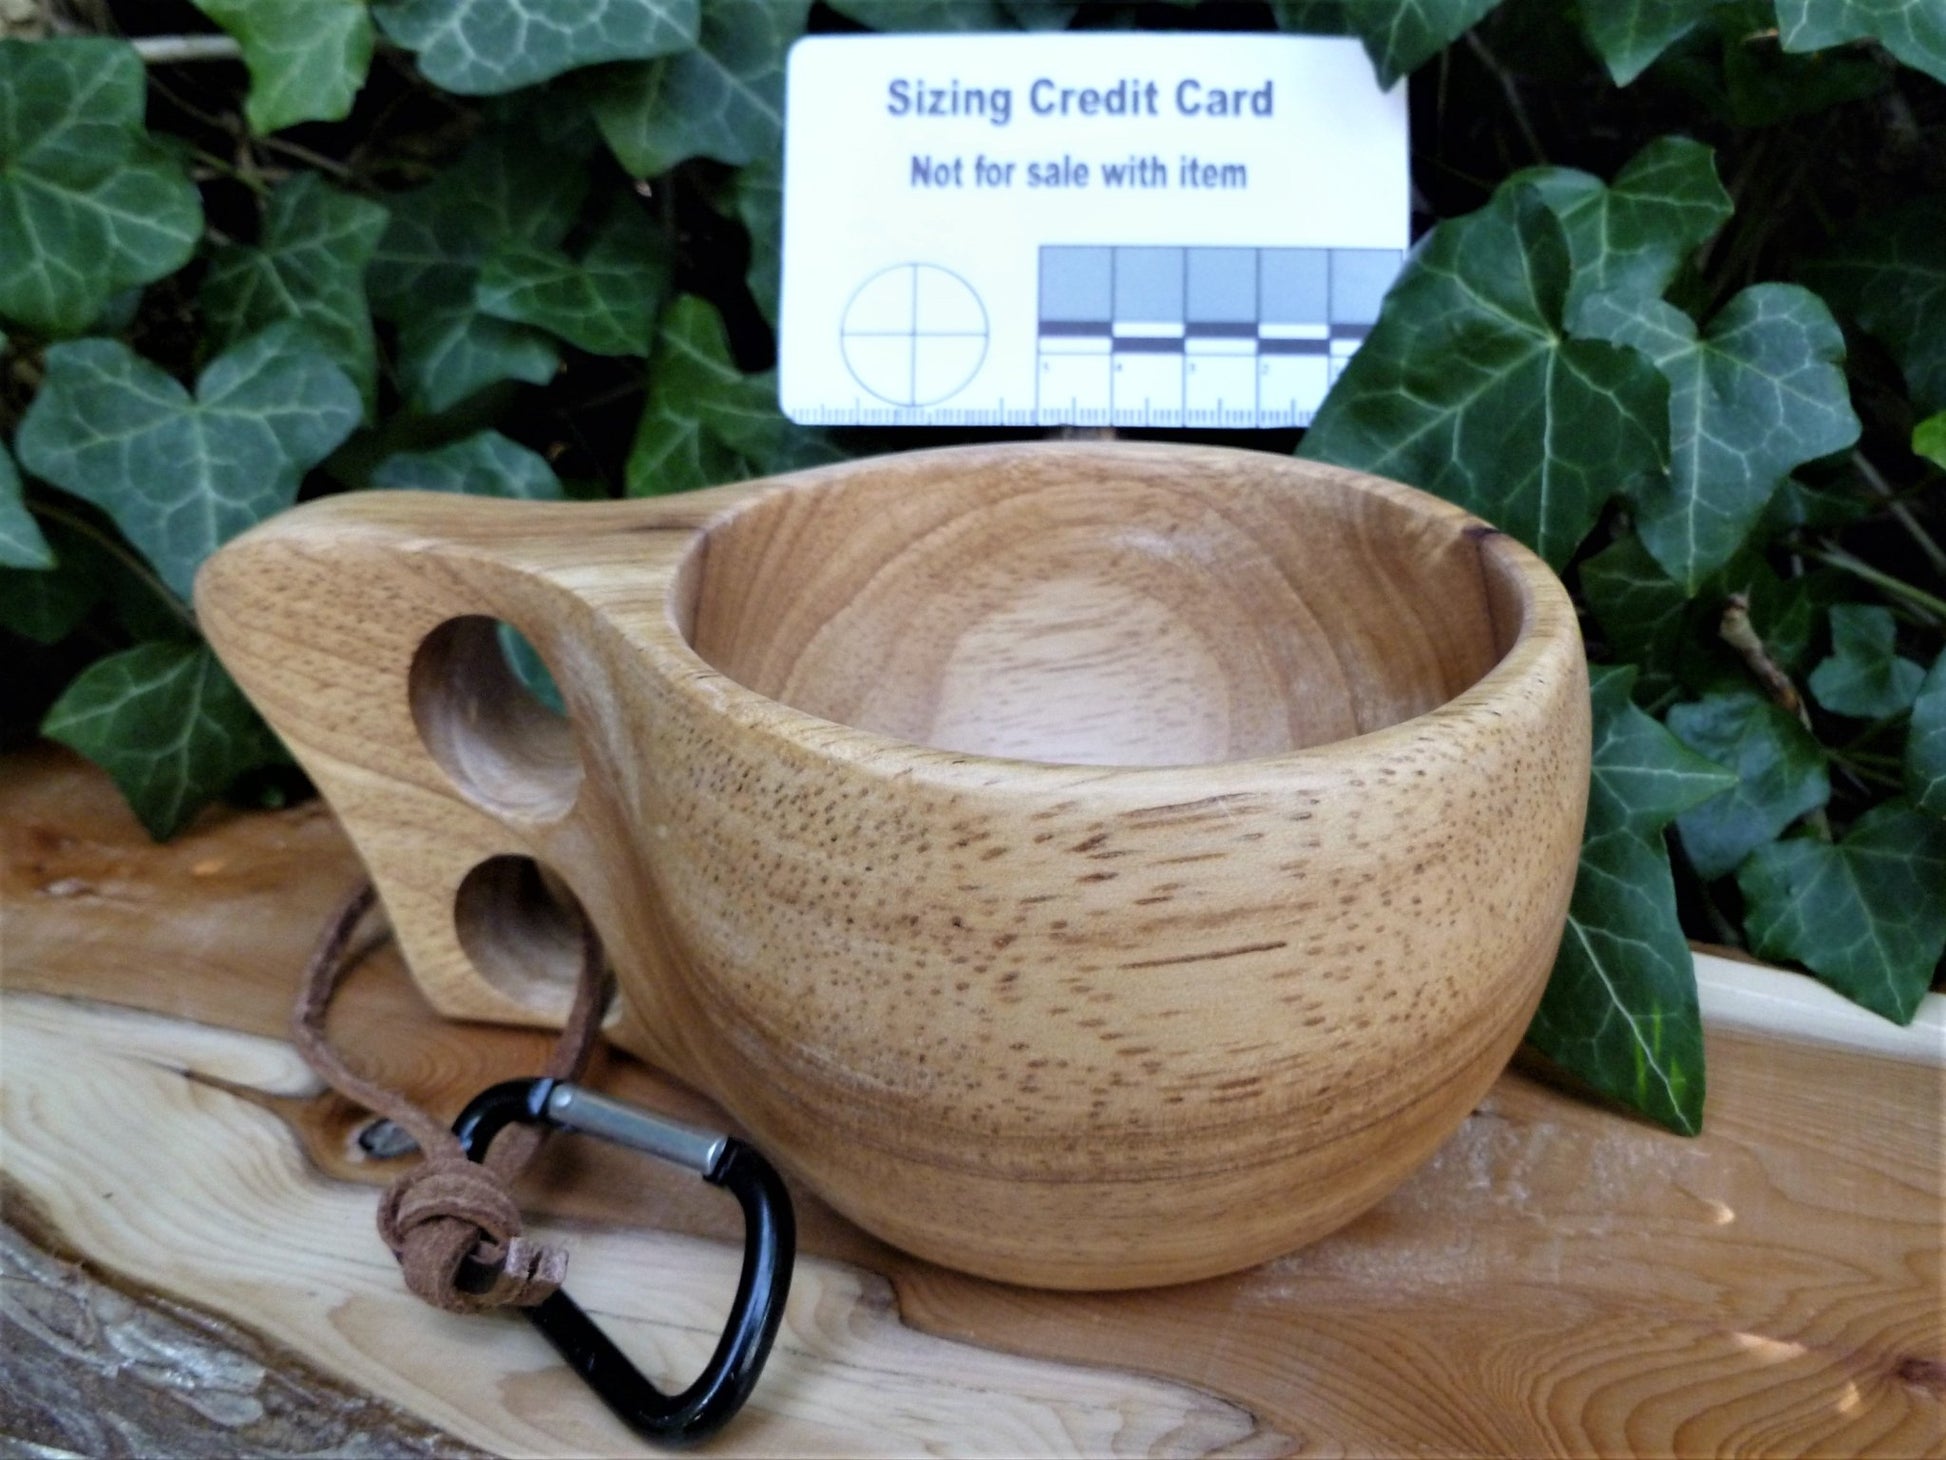 Kuksa Two holed pointed handle Wooden Mug is a traditional wooden drinking cup from Nordic Lapland Finland/Scandinavian Saami Kuksa Huggins Attic    [Huggins attic]